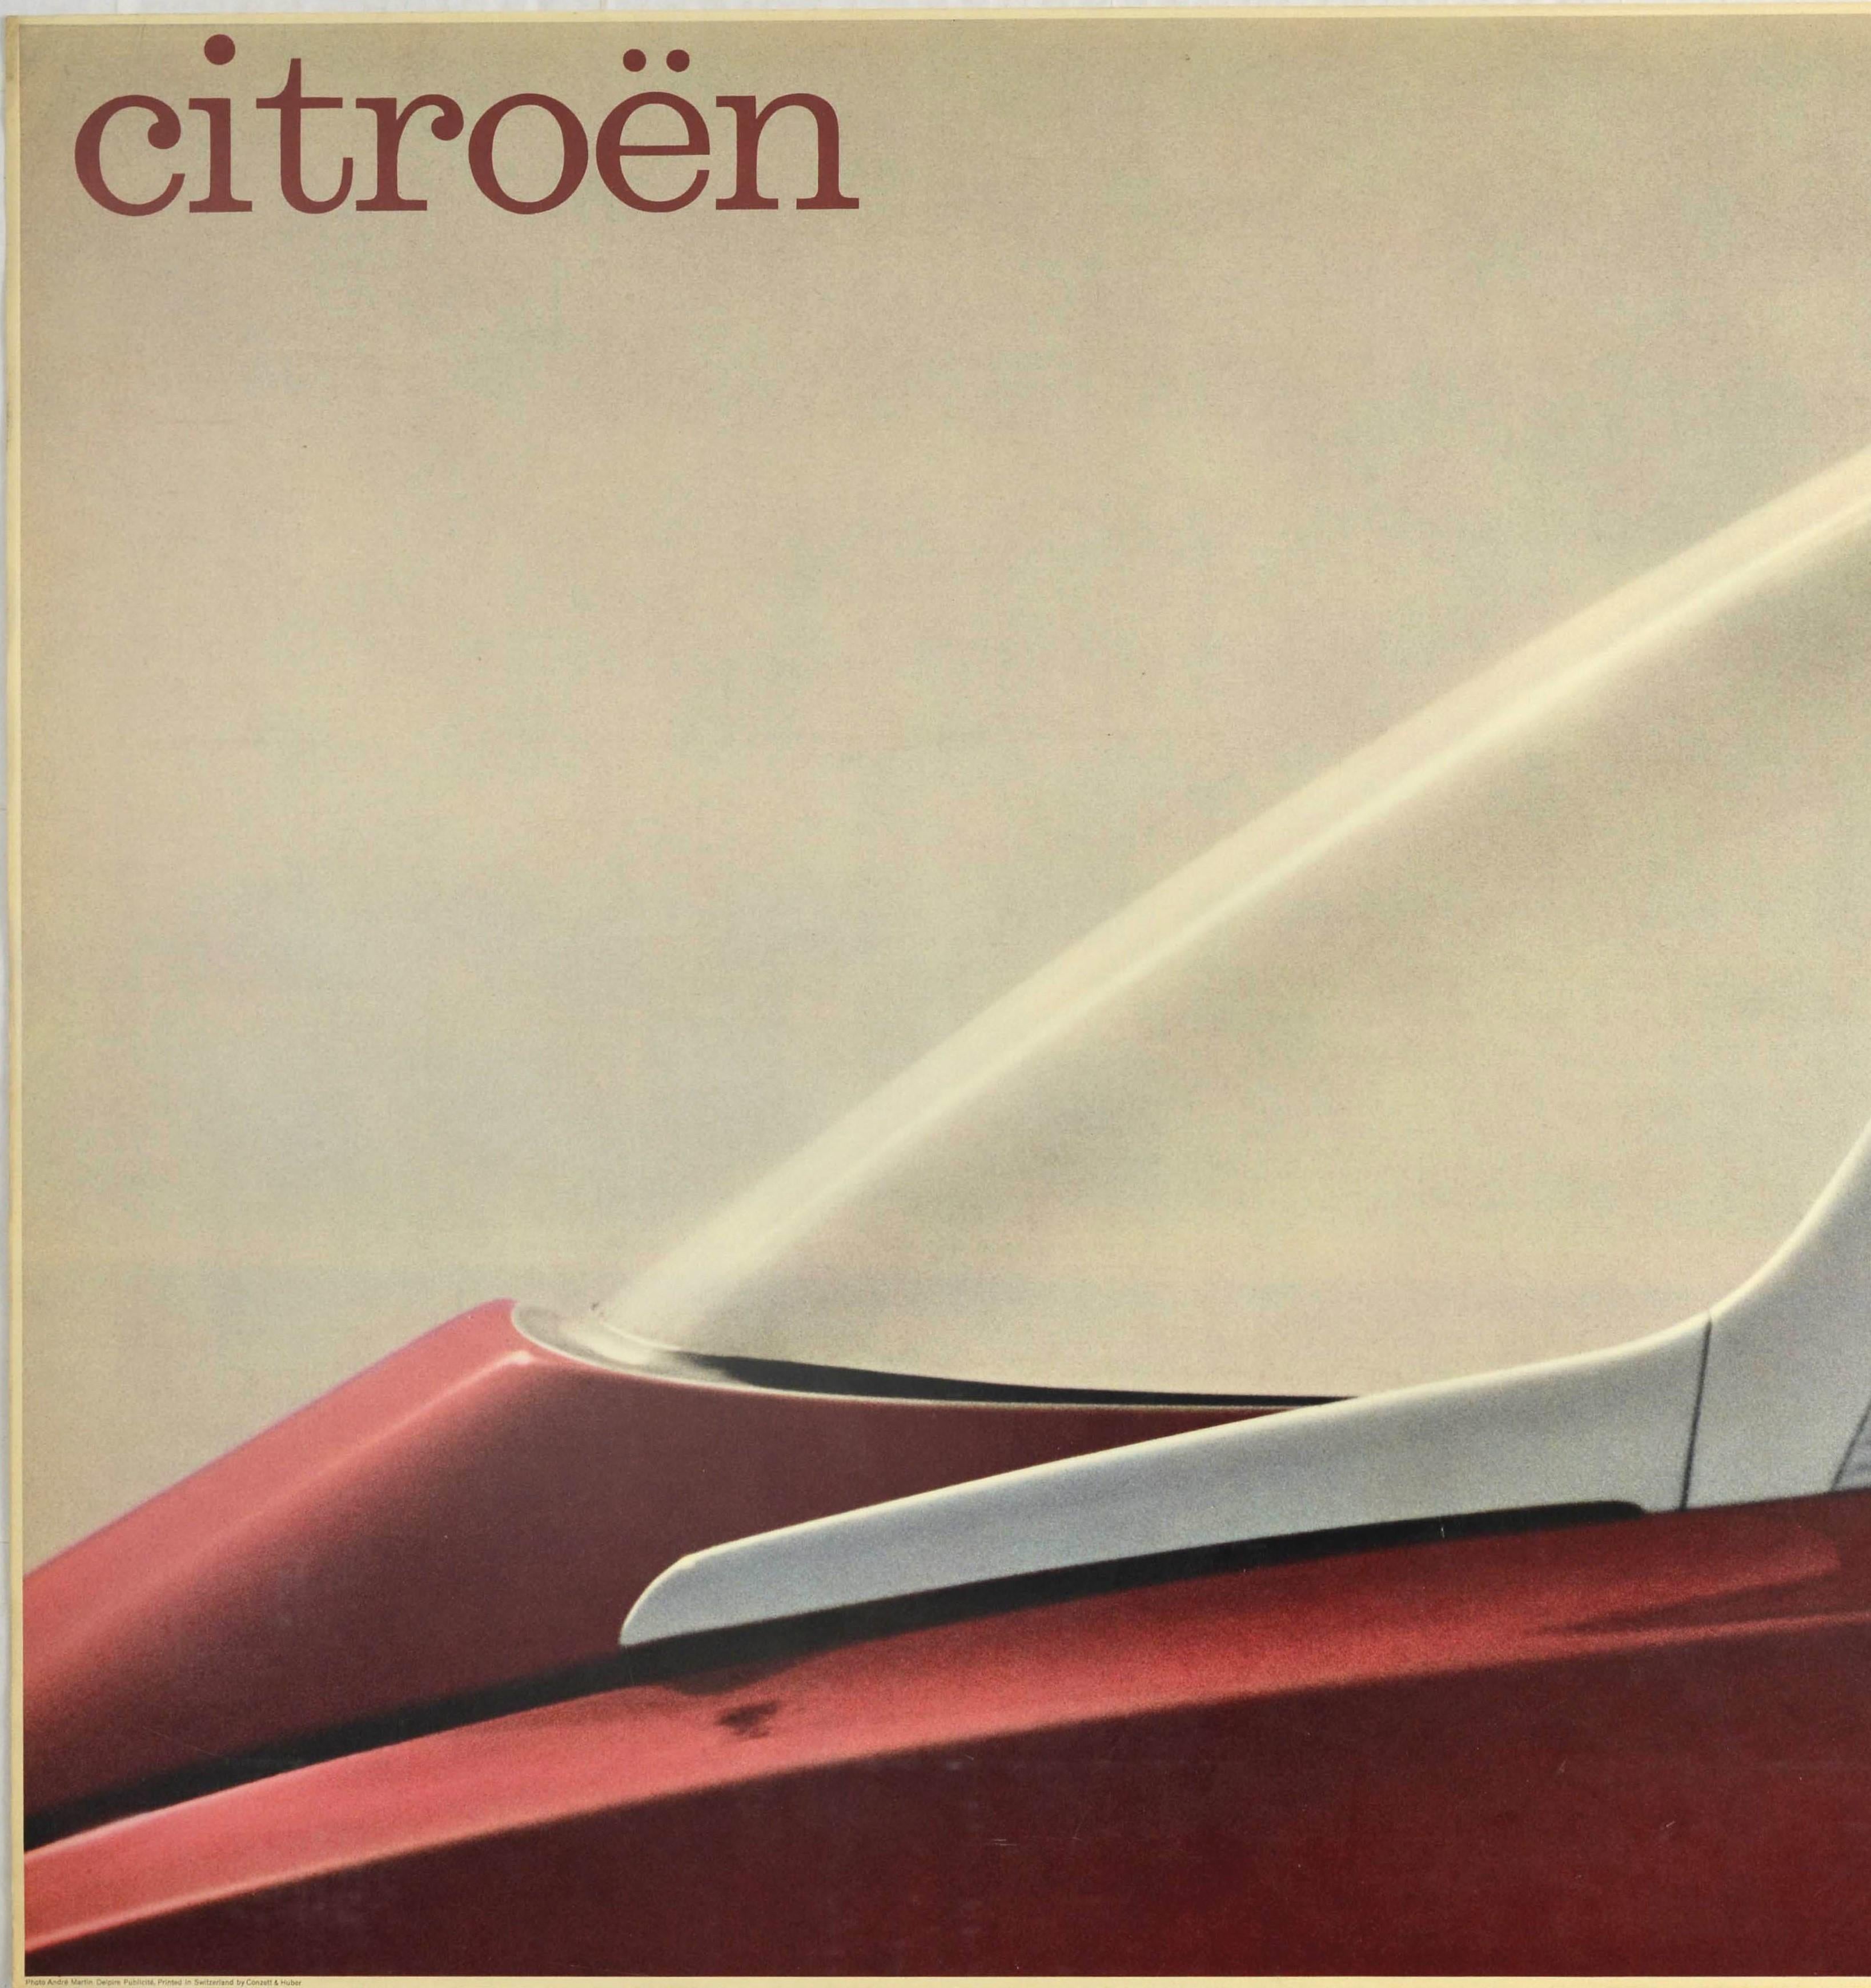 Original vintage car advertising poster issued by the French automobile manufacturer Citroen (founded 1919) featuring a great minimalist design showing a partial photo of the rear windshield of a red and silver 1960 Citroen DS car with the word